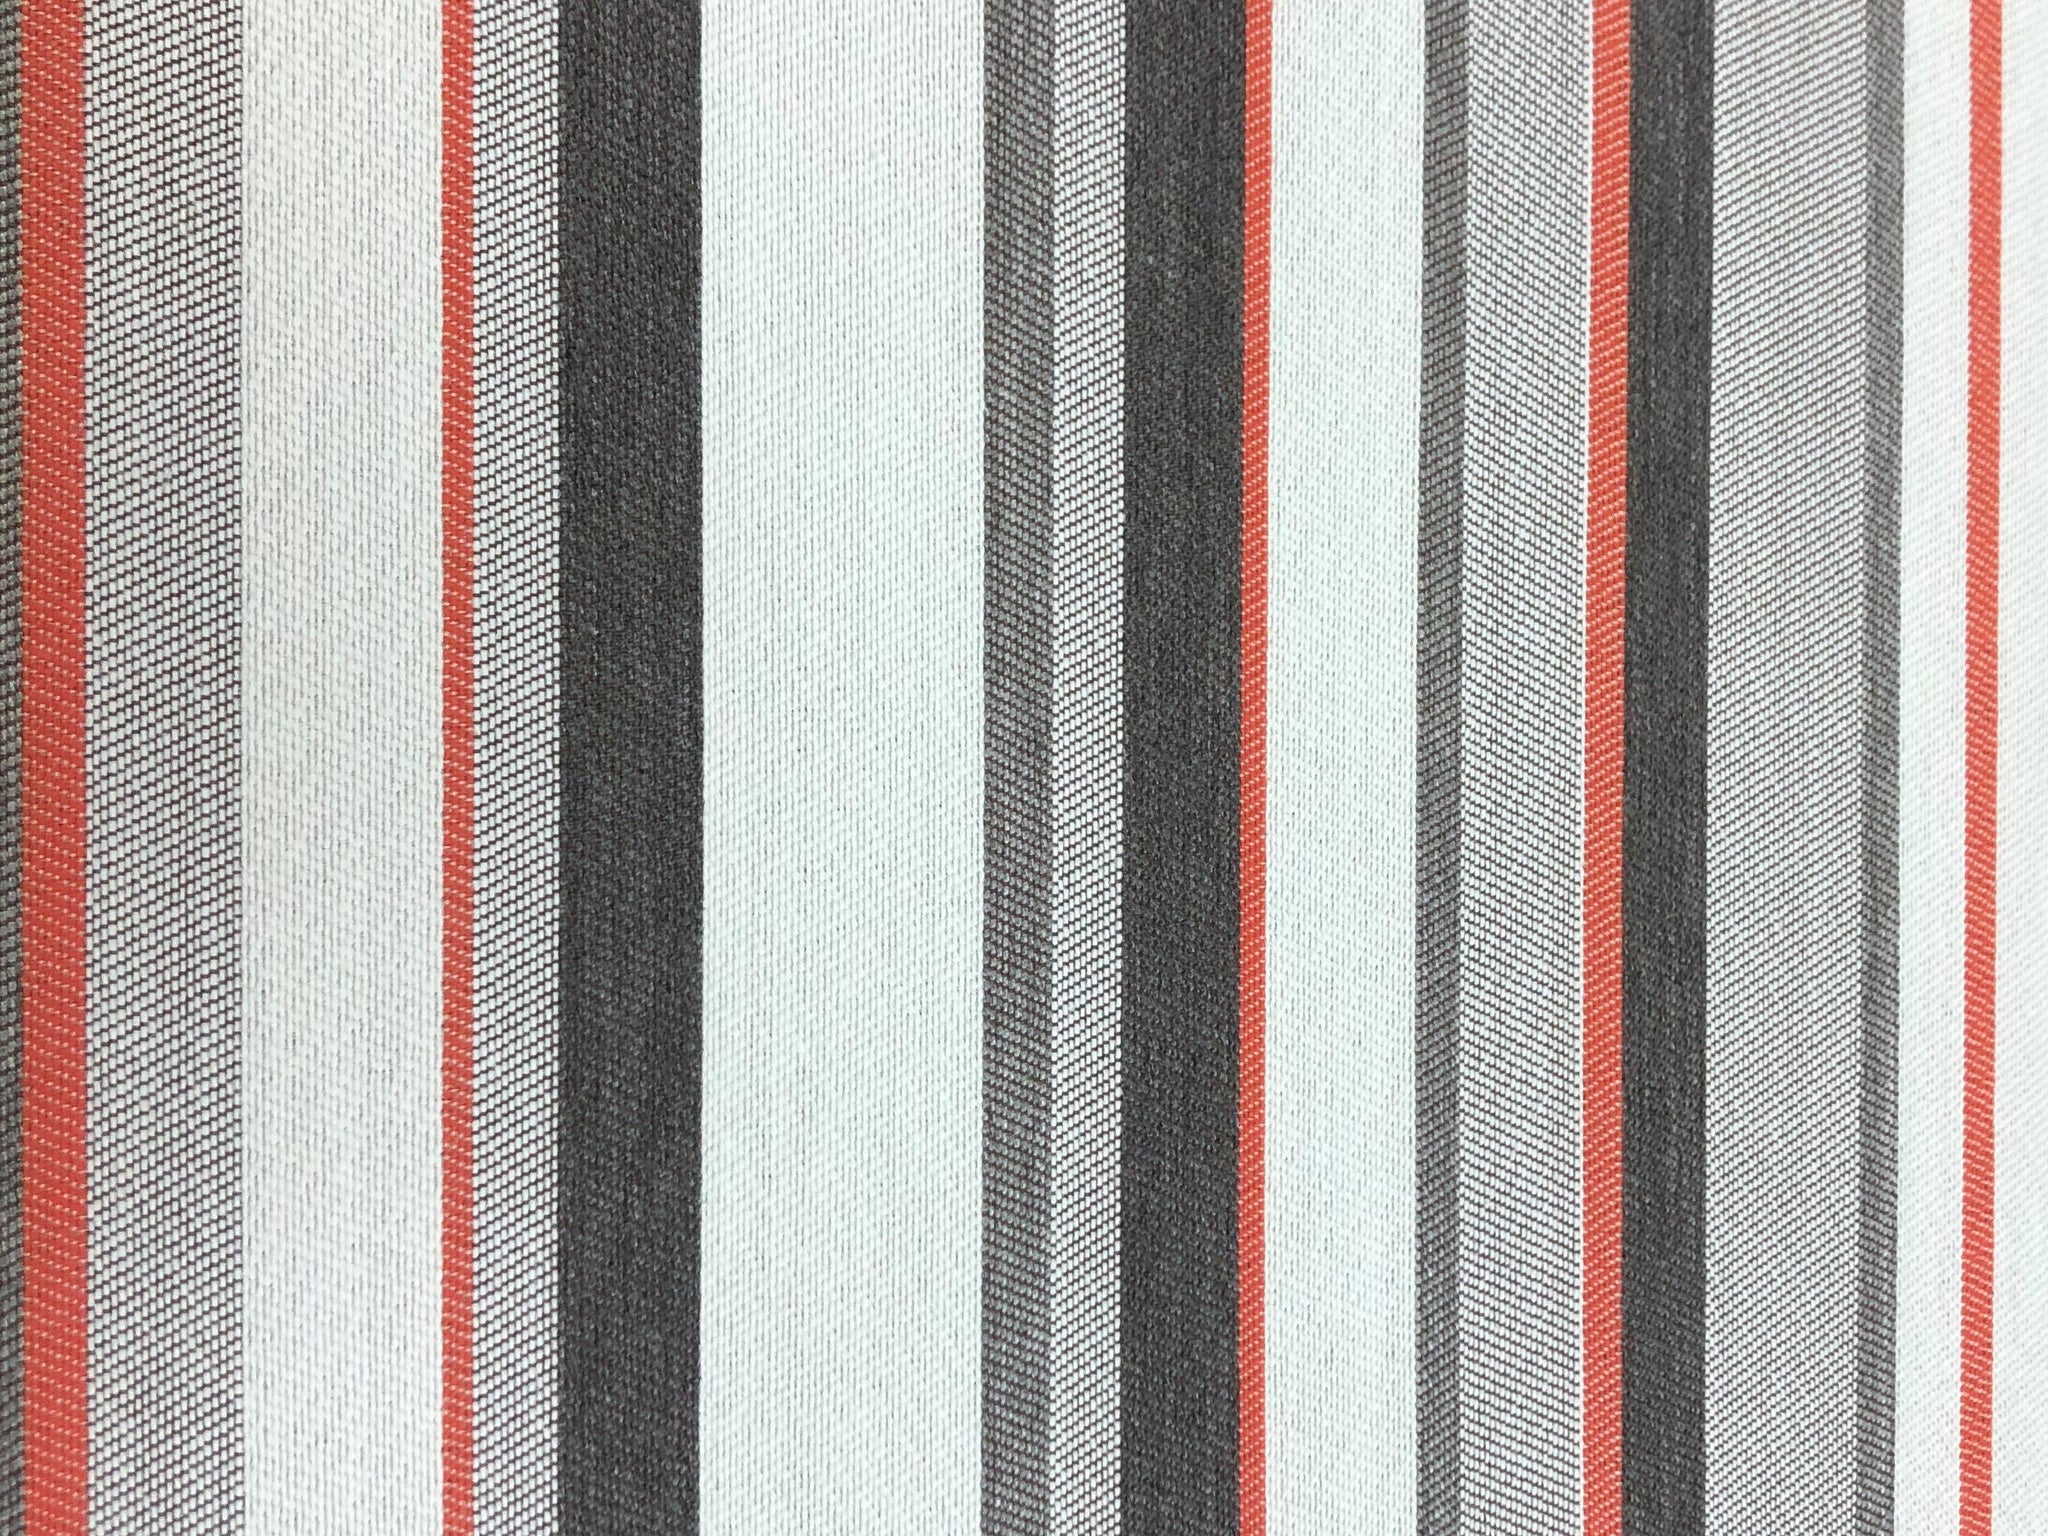 Grey Red Orange Striped Patterned Velvet Upholstery Curtains Cushions Fabric